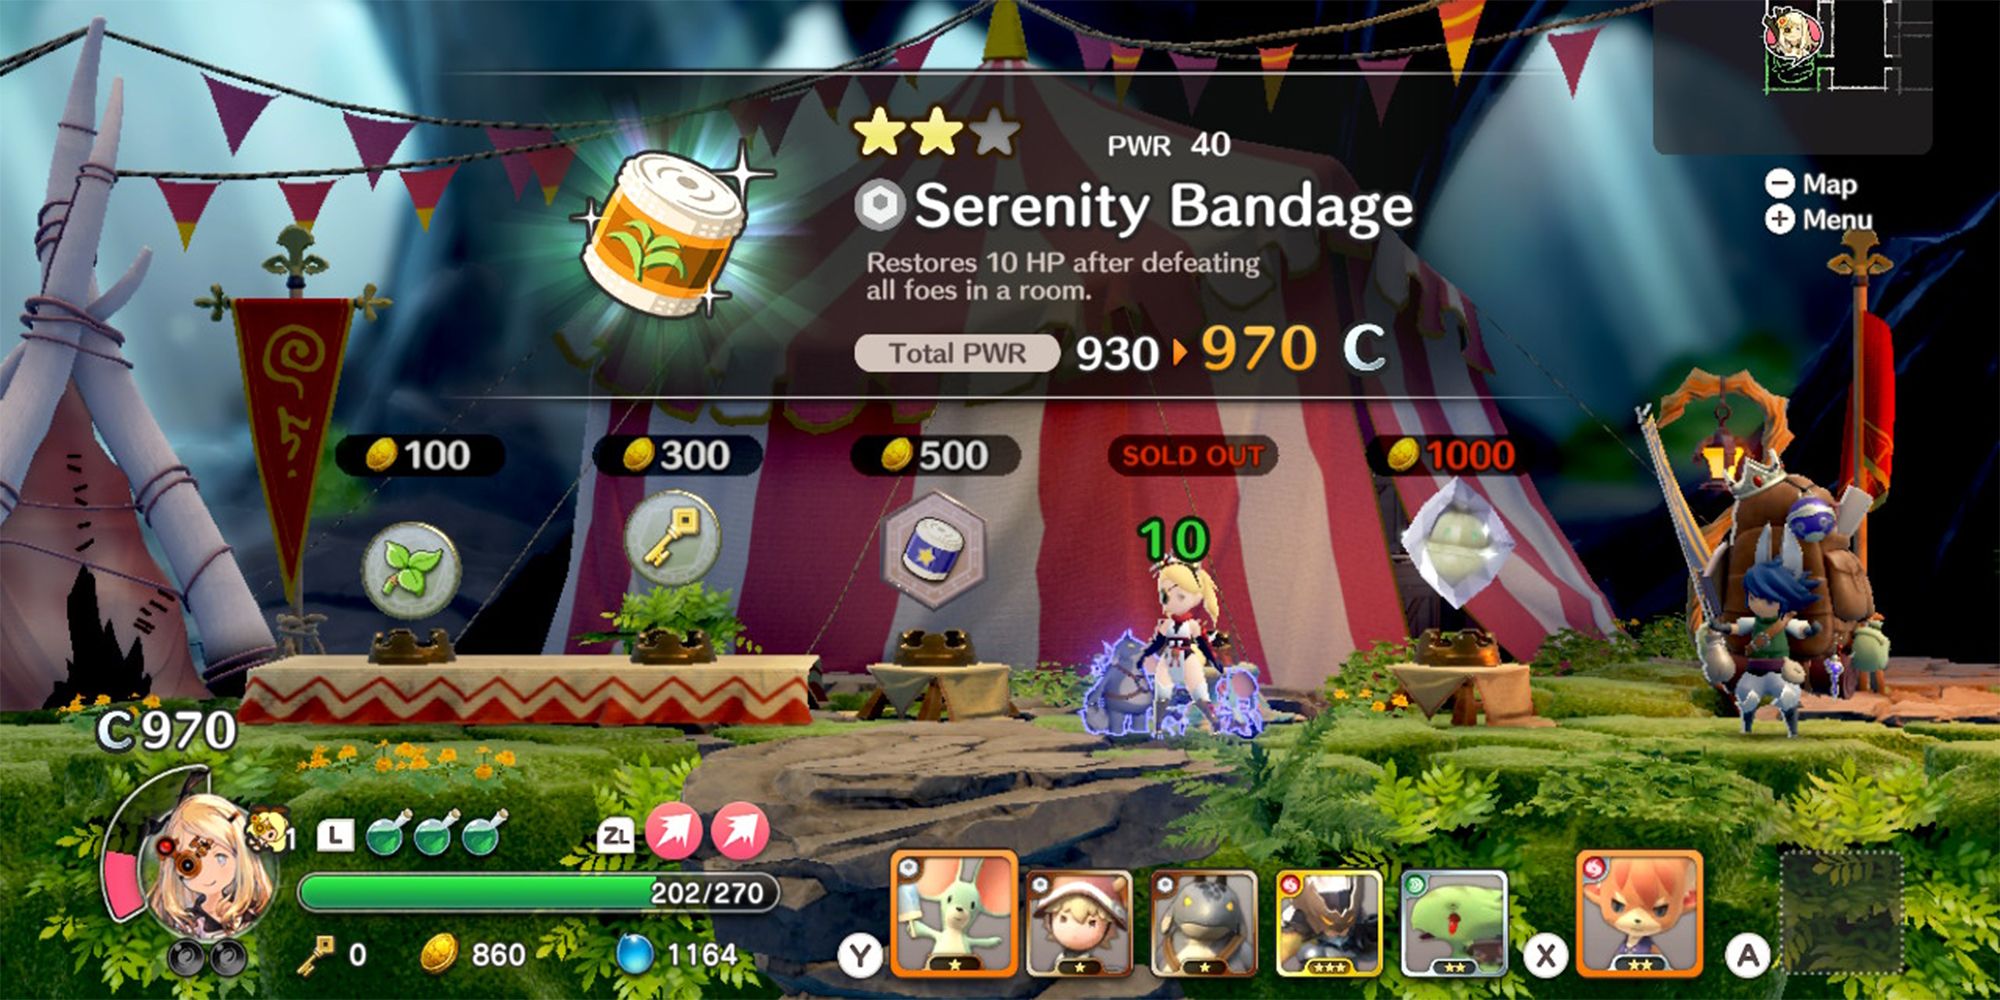 serenity bandage purchased from shop